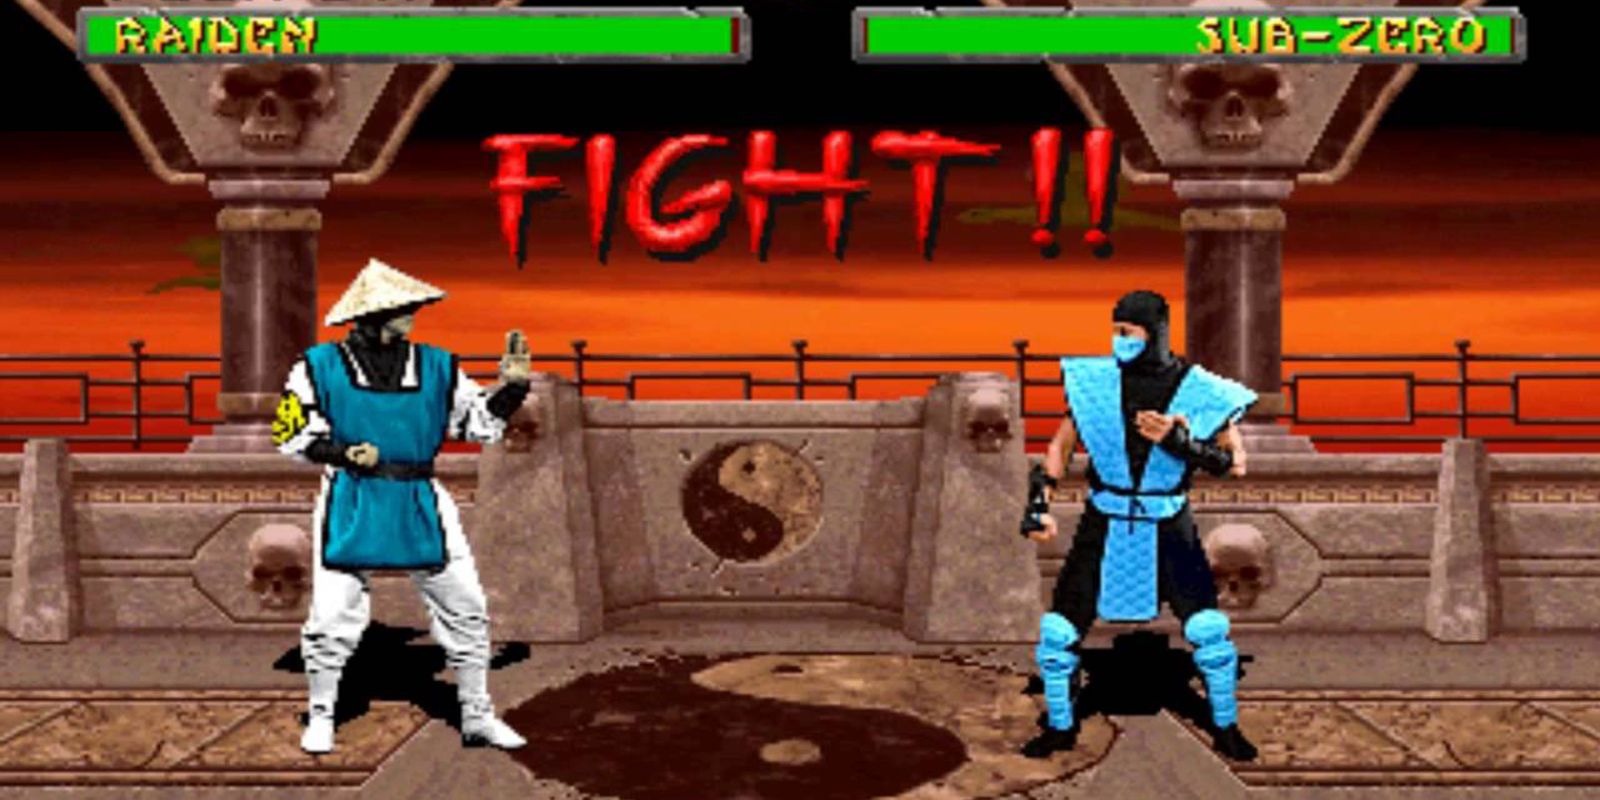 Mortal Kombat II' Source Code Leaked, Containing Cut Moves, Animations,  Fatalities and More [Video] - Bloody Disgusting